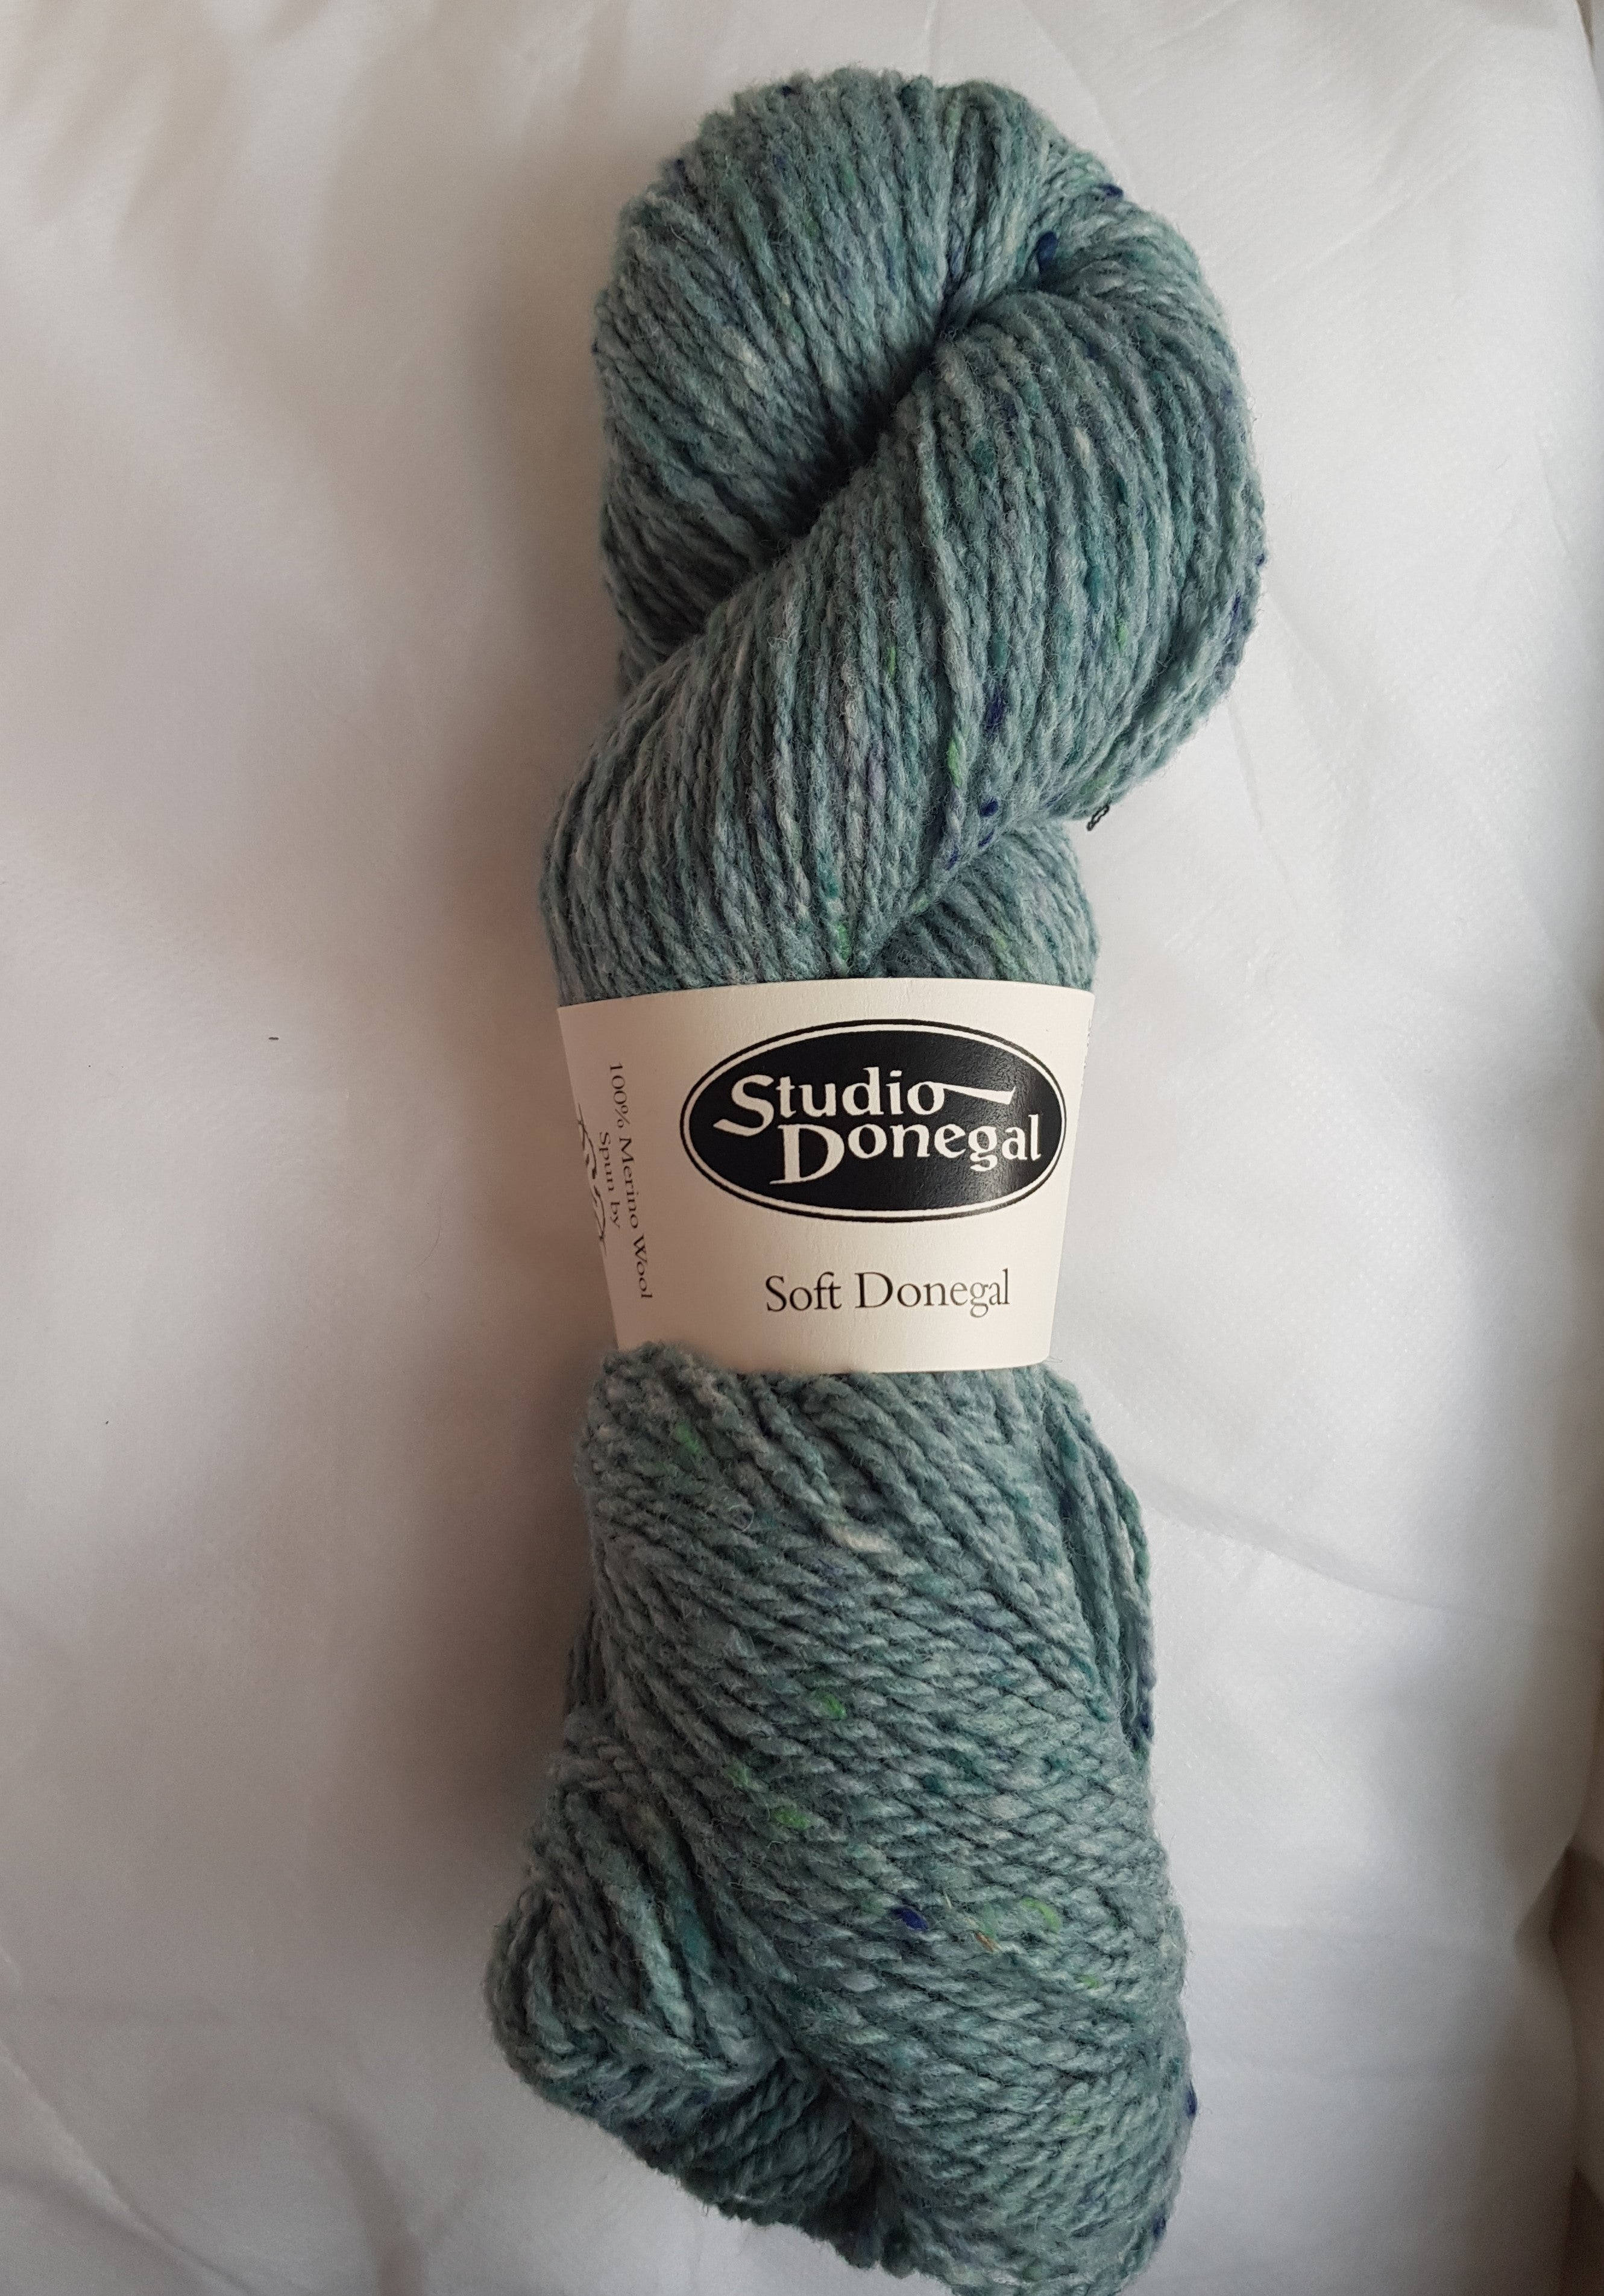 100g Hank of Soft Donegal Knitting Wool Colour: 5519